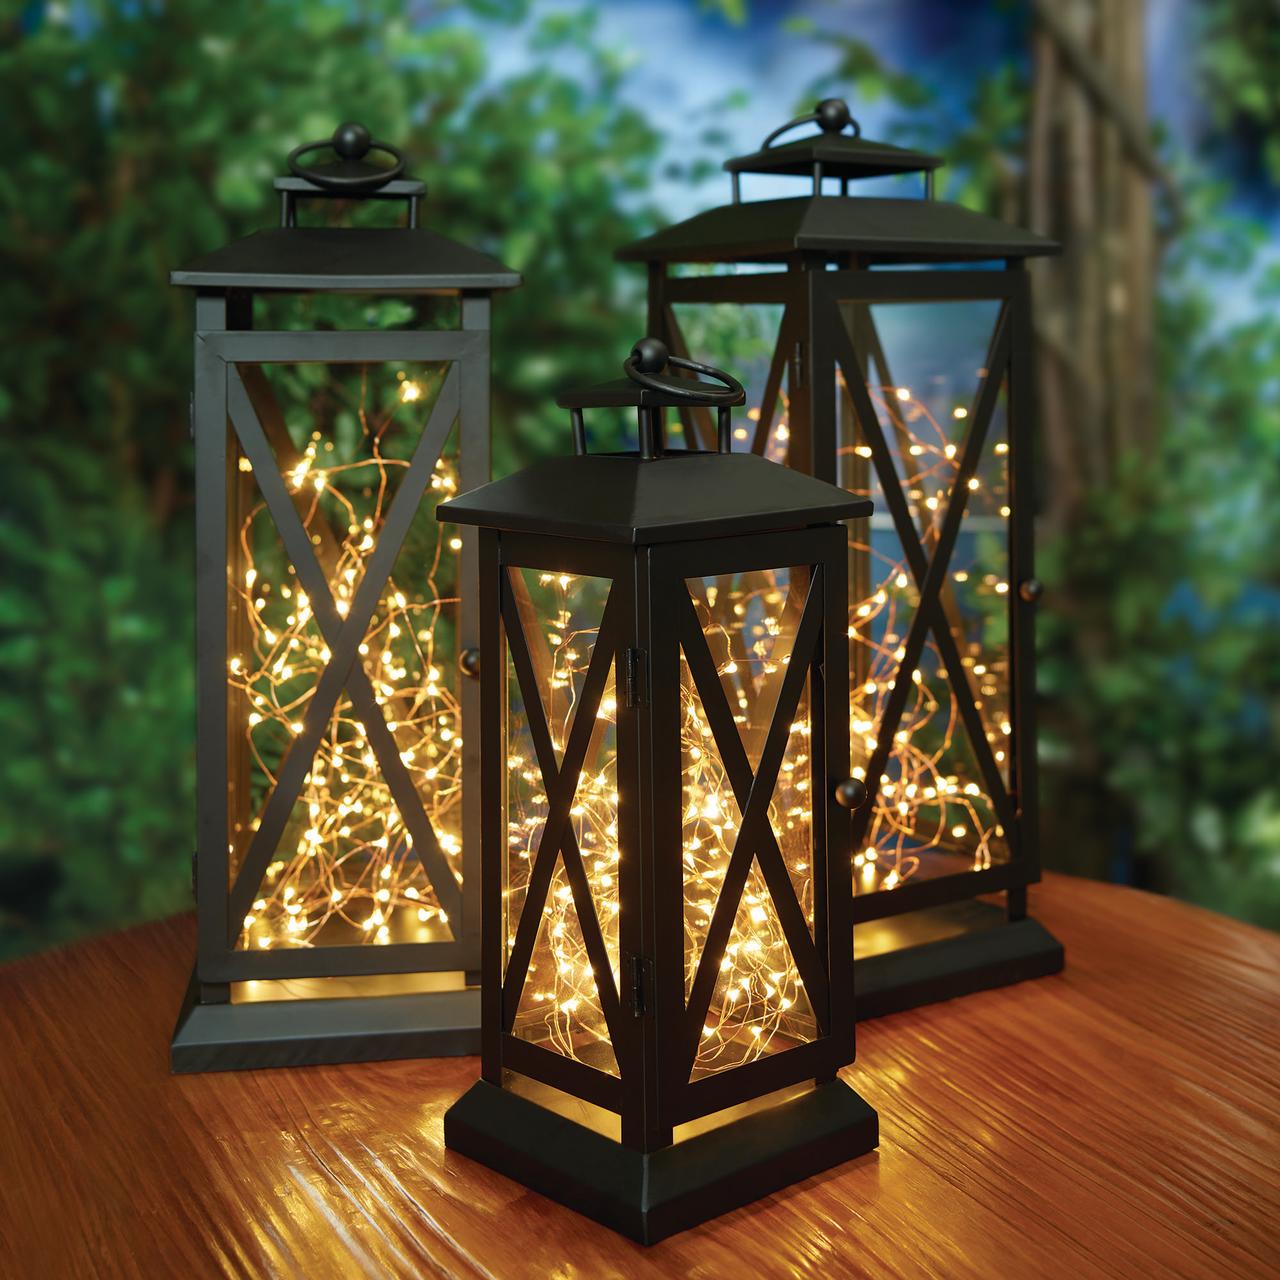 Better Homes & Gardens 36-Count LED Warm White Wire Outdoor String Lights with 8 Lighting Functions - image 2 of 8